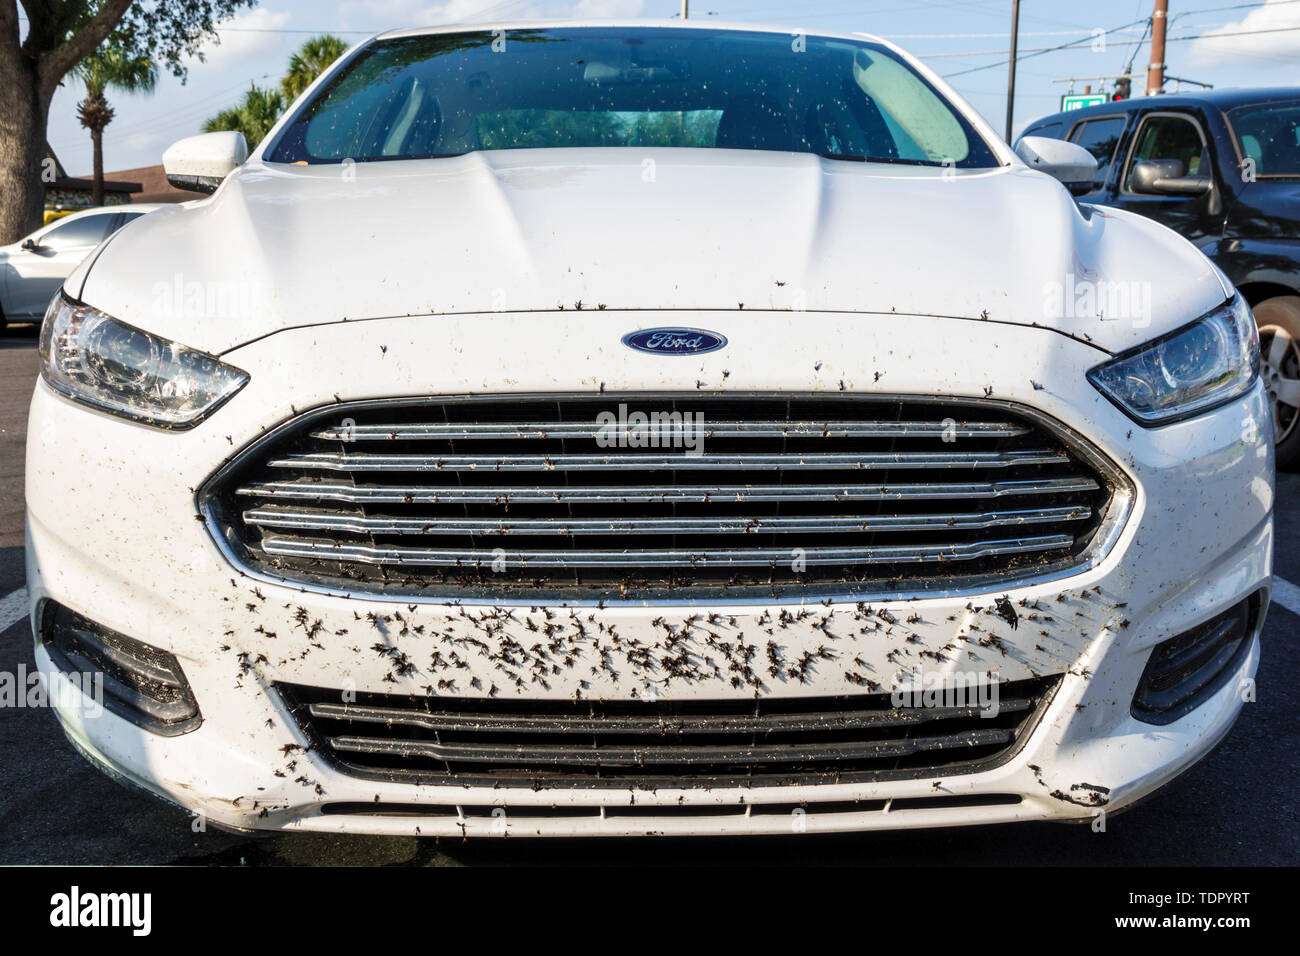 Florida,Zolfo Springs,Ford Fusion,car,grill,insect-covered,love bug,lovebug,Plecia nearctica,march fly,mating season,spring flight,FL190510044 Stock Photo